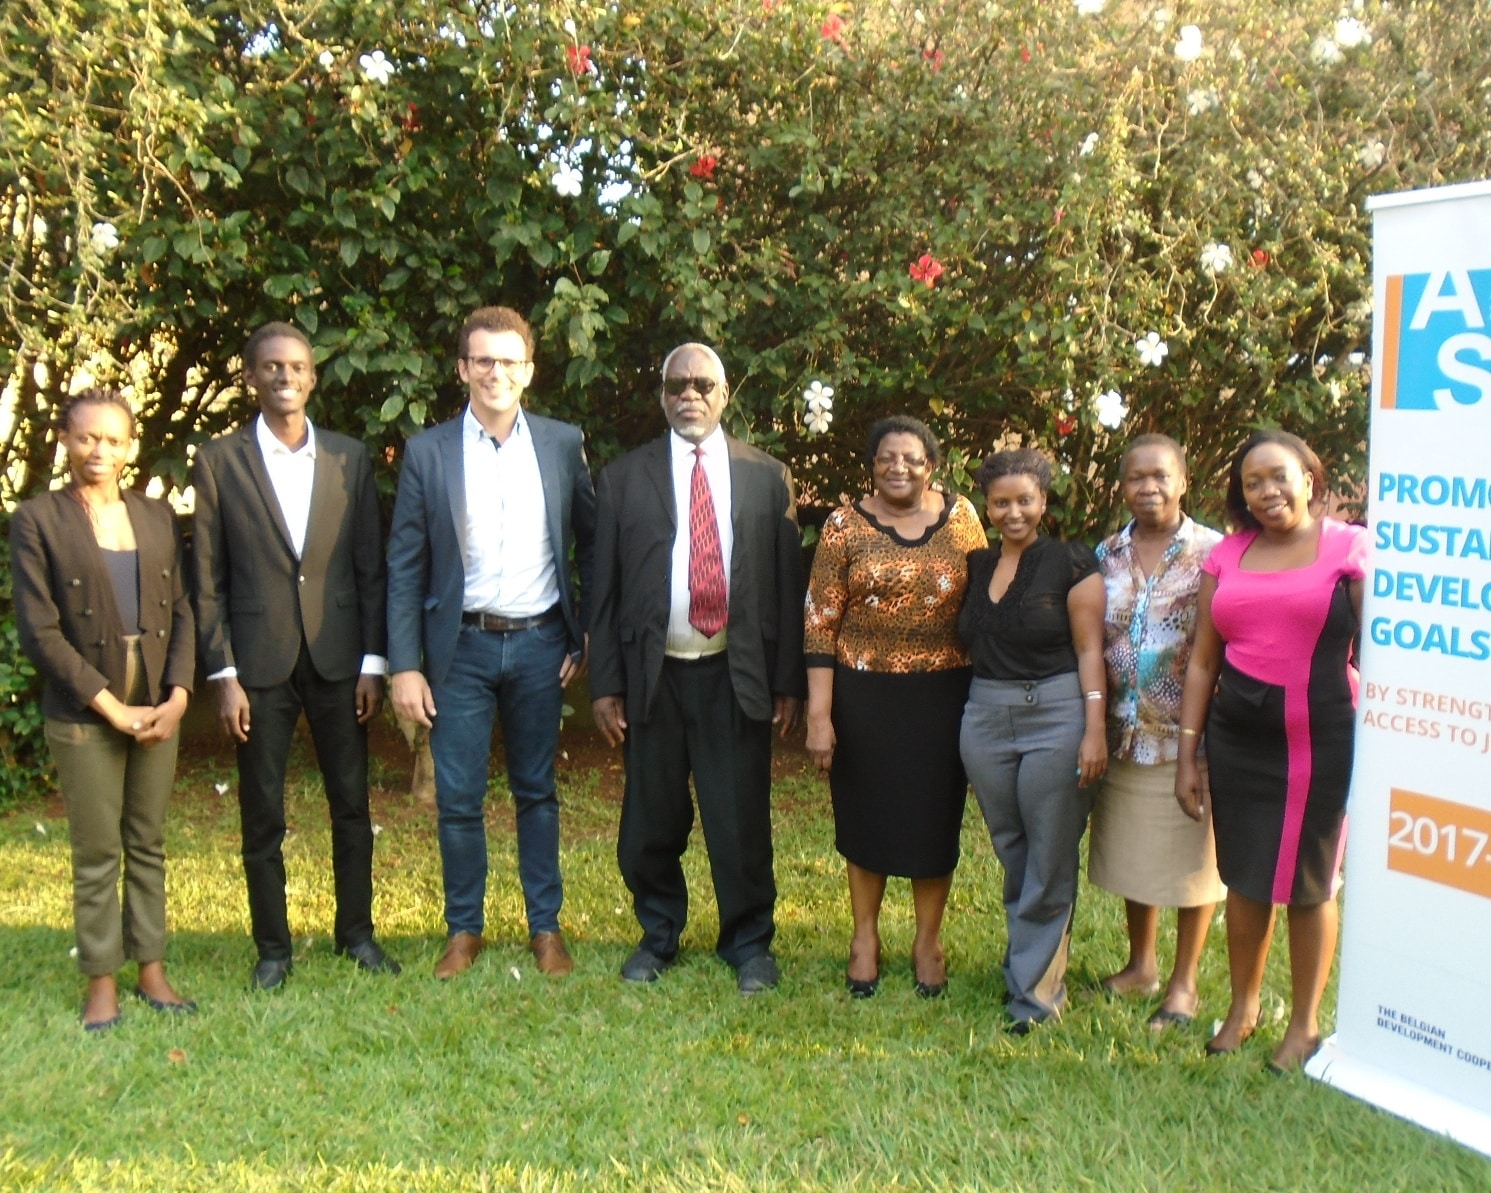 ASF support provided to the International Crimes Division in Uganda